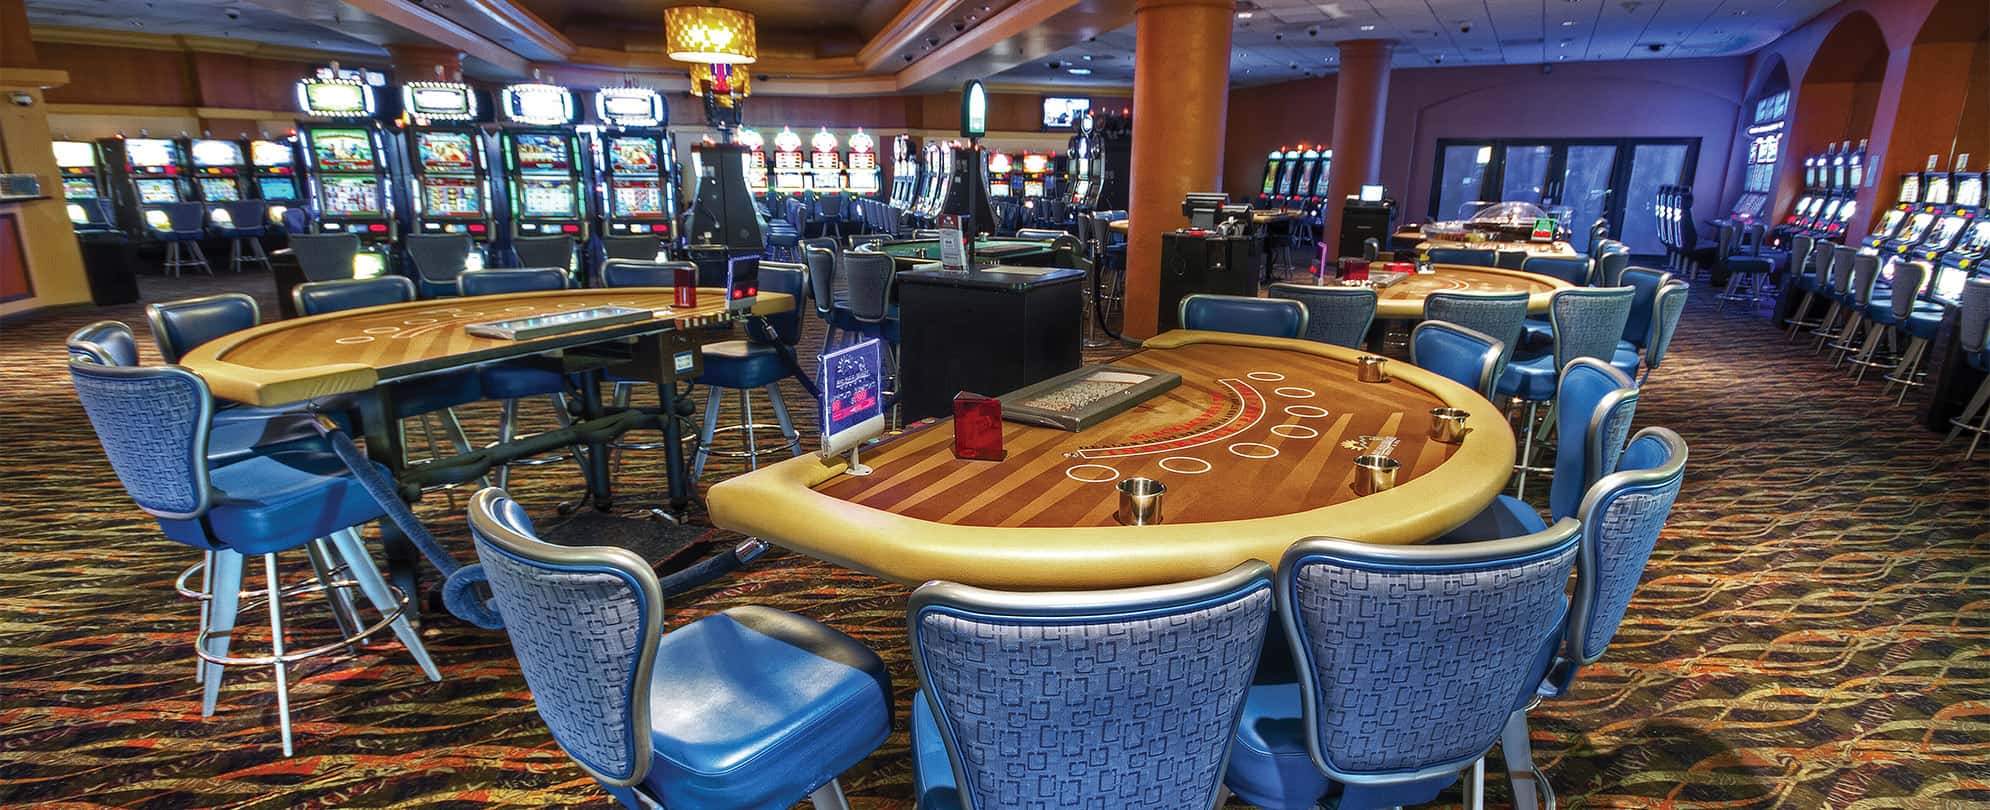 Blackjack tables and slot machines in the casino at Margaritaville Vacation Club by Wyndham - Rio Mar.